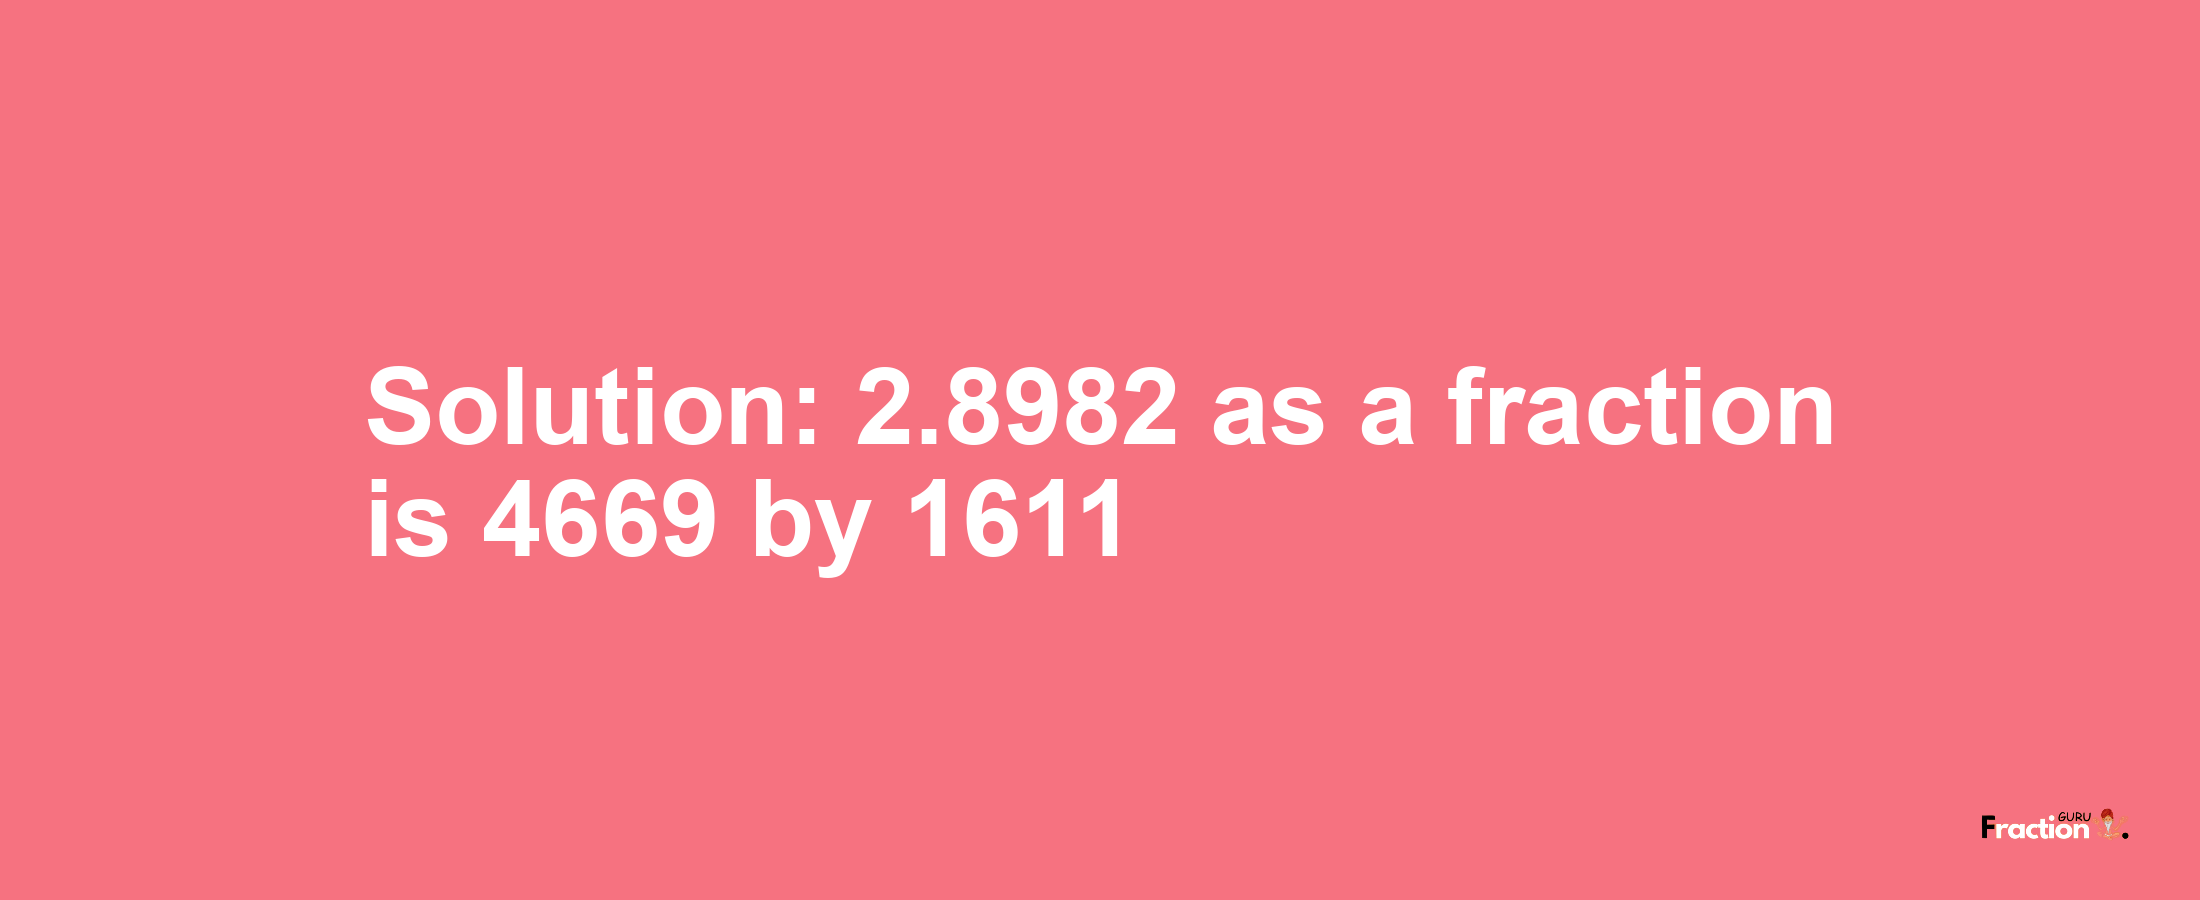 Solution:2.8982 as a fraction is 4669/1611